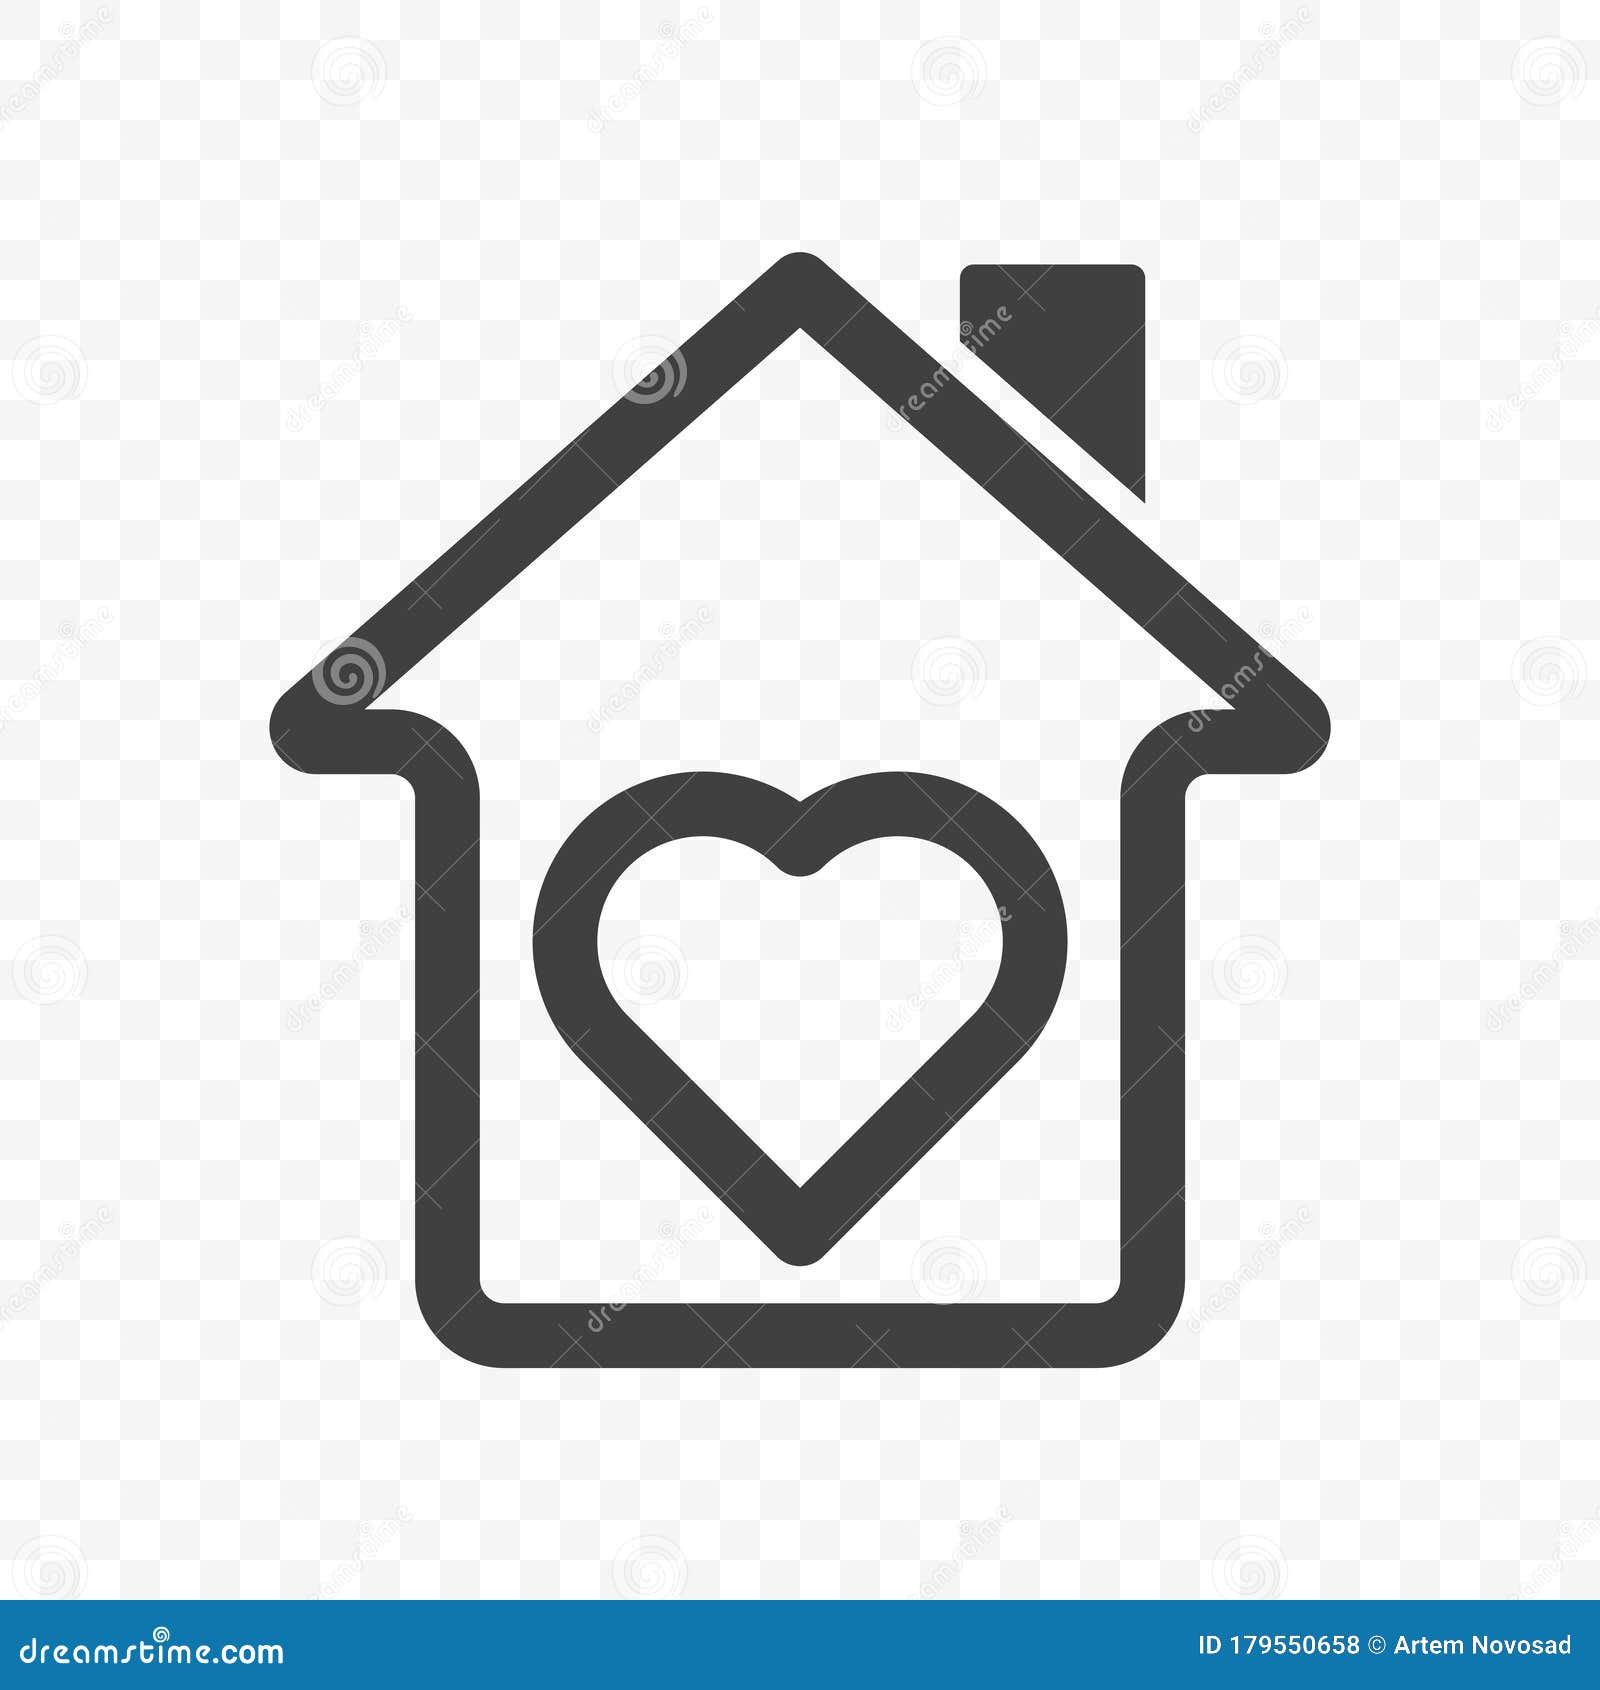 Home Icon. Image Of A House With A Chimney. The Heart Is Inscribed ...